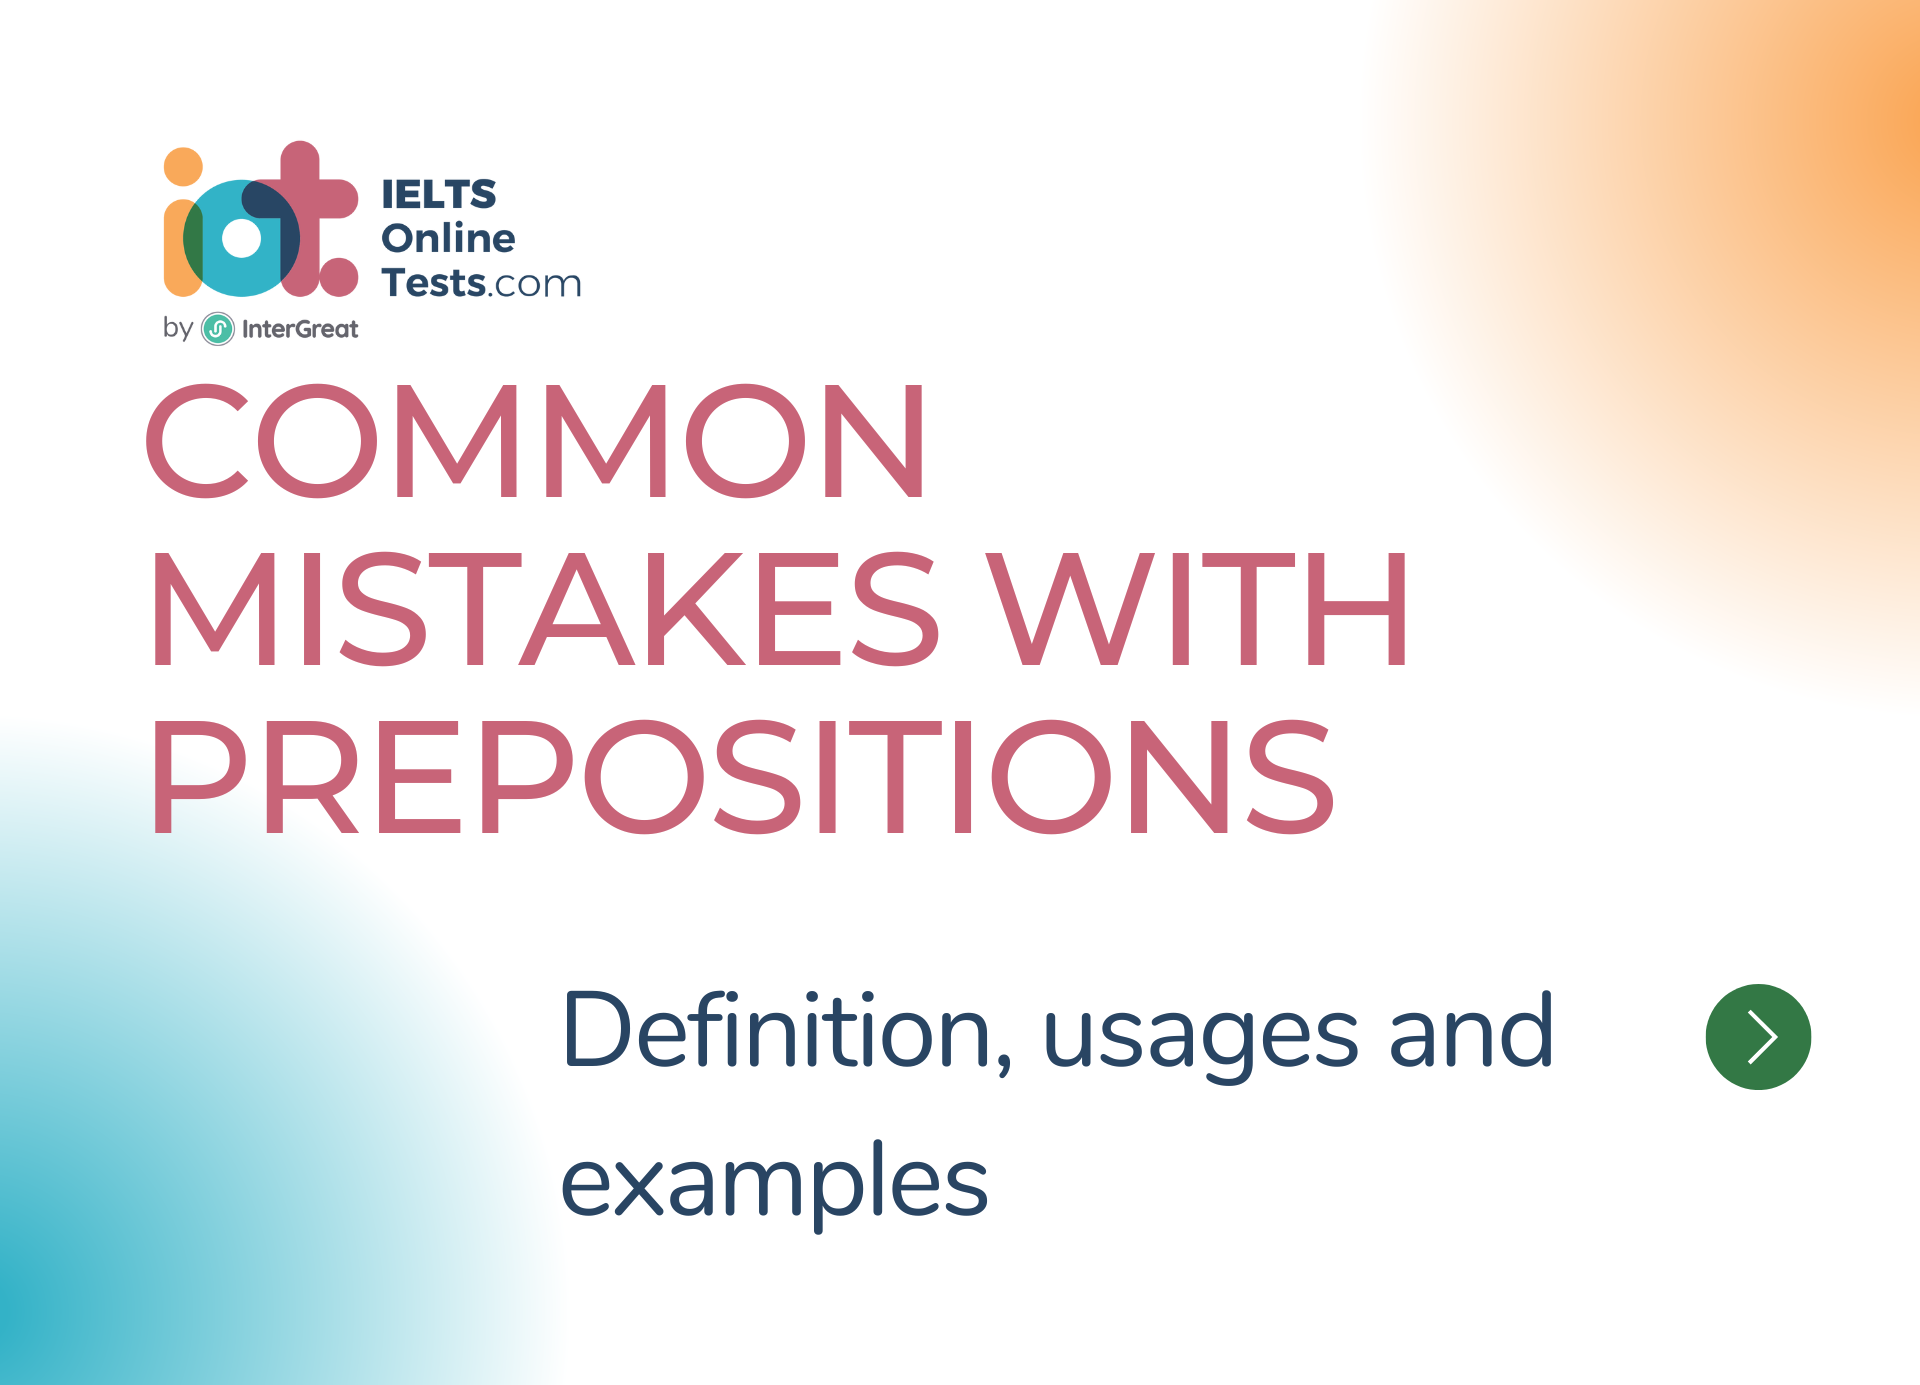 Common mistakes with prepositions